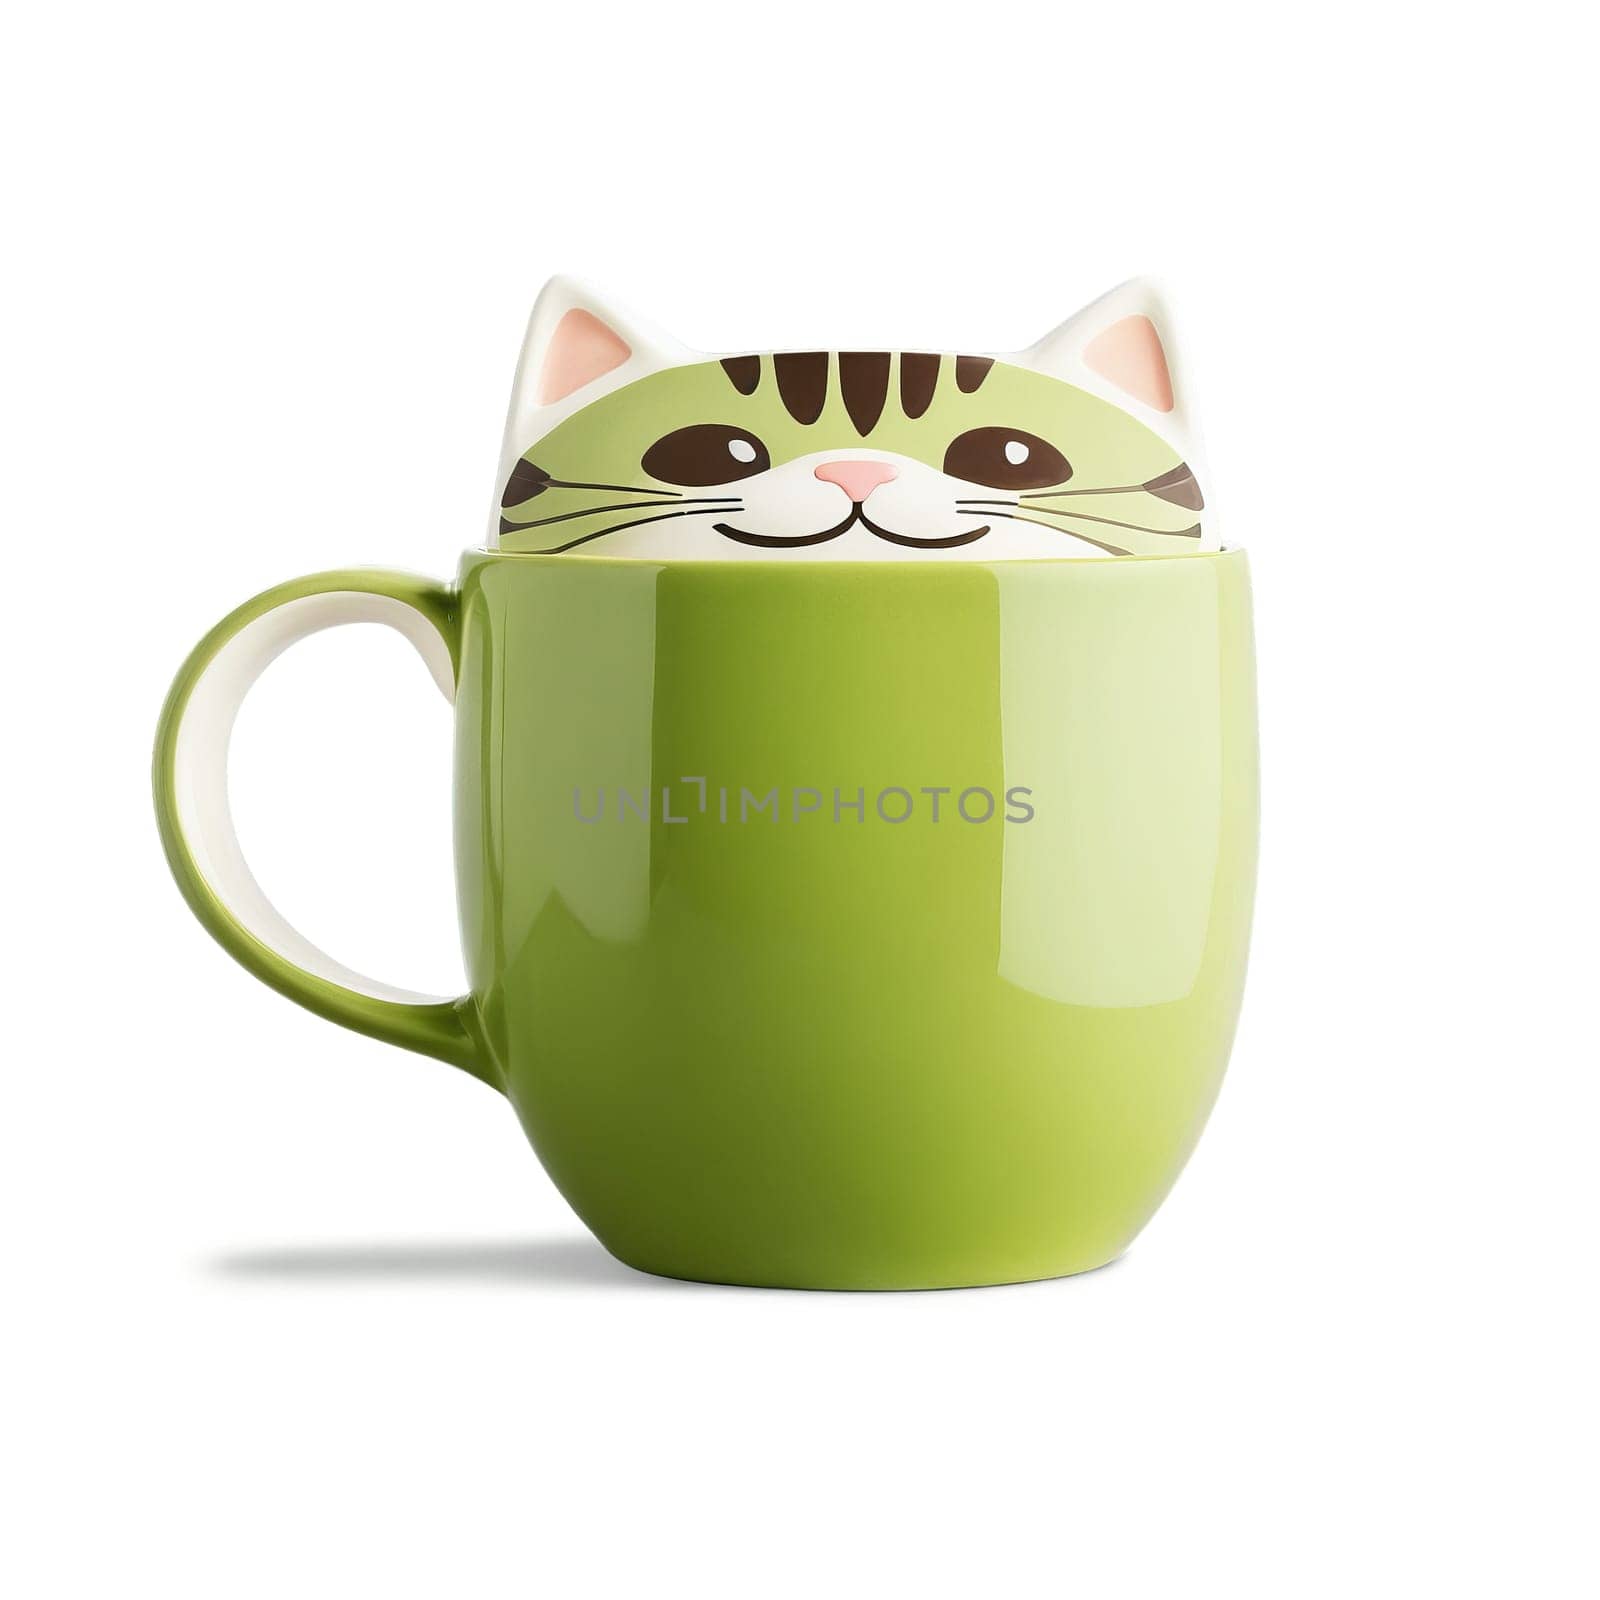 Quirky animal shaped ceramic mug with a playful cat design filled with a creamy matcha by panophotograph